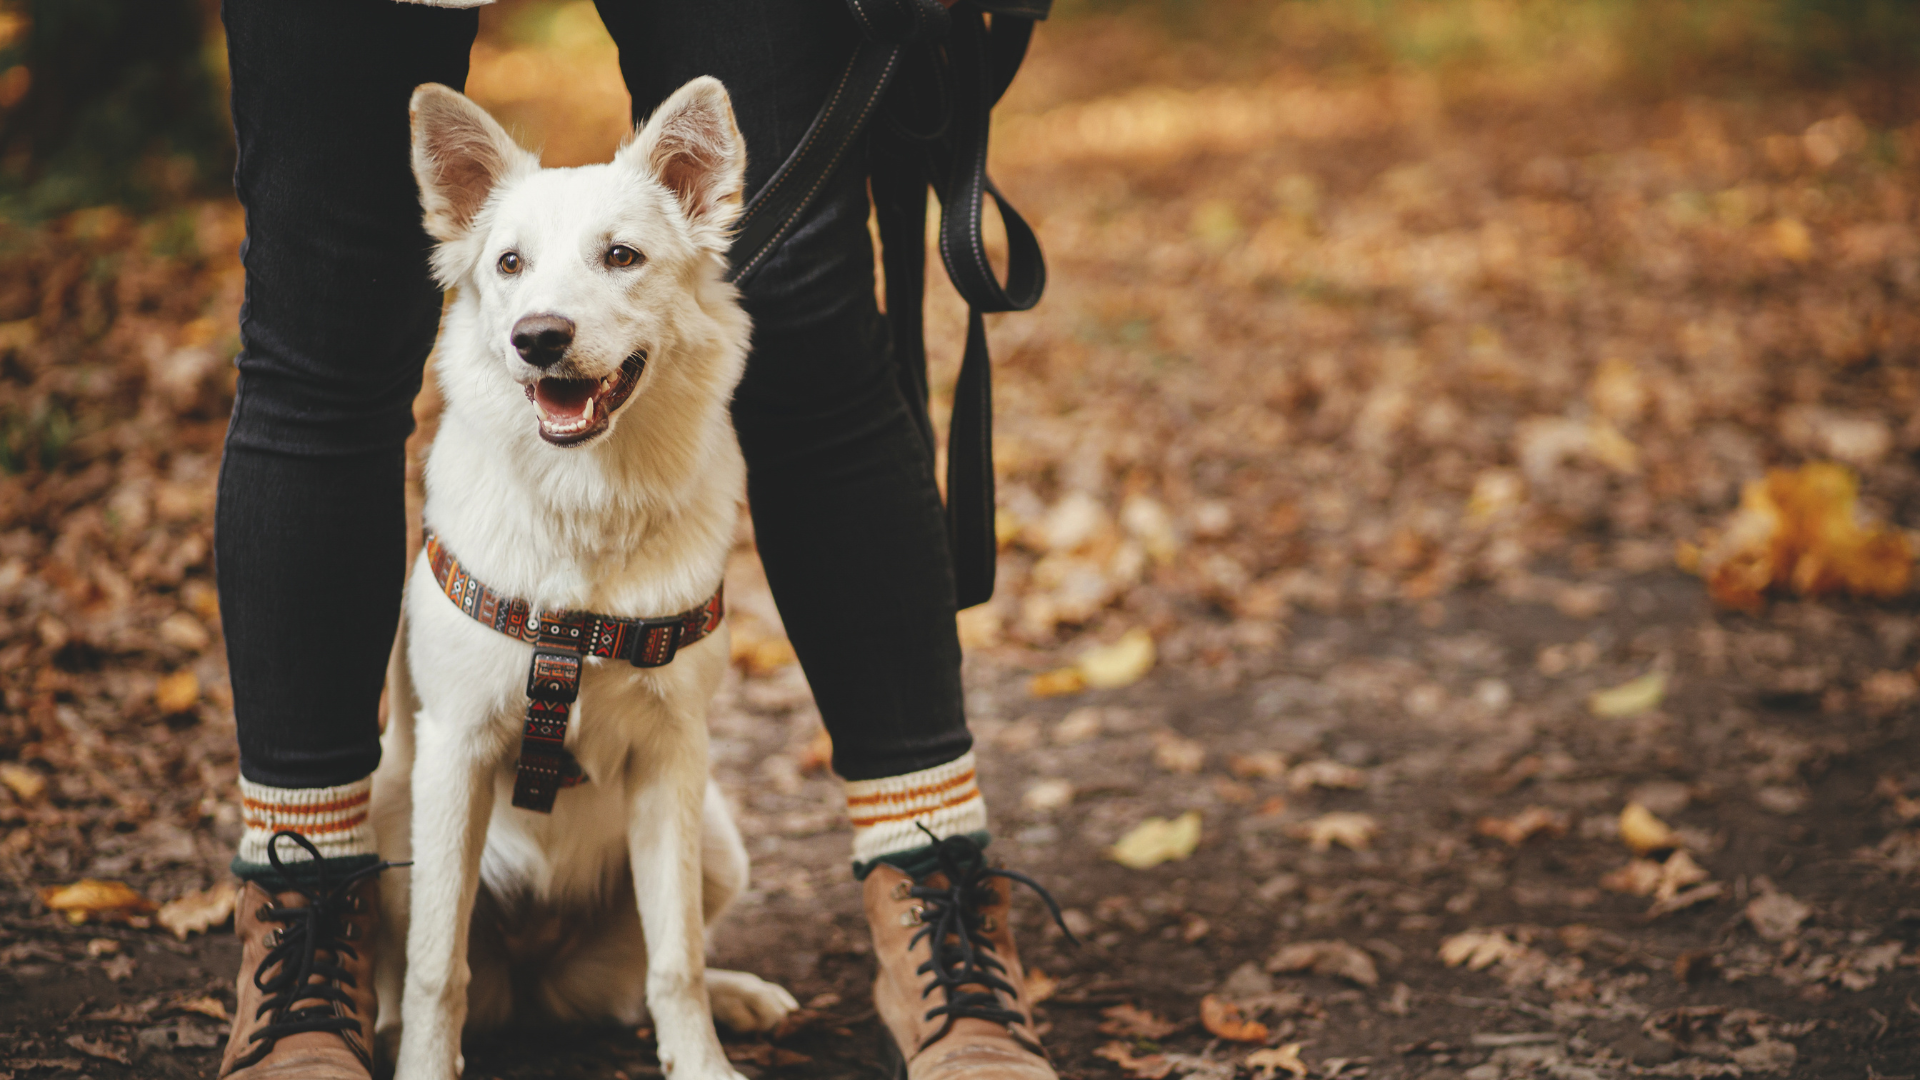 Managing Dog Anxiety on Busy Hiking Trails